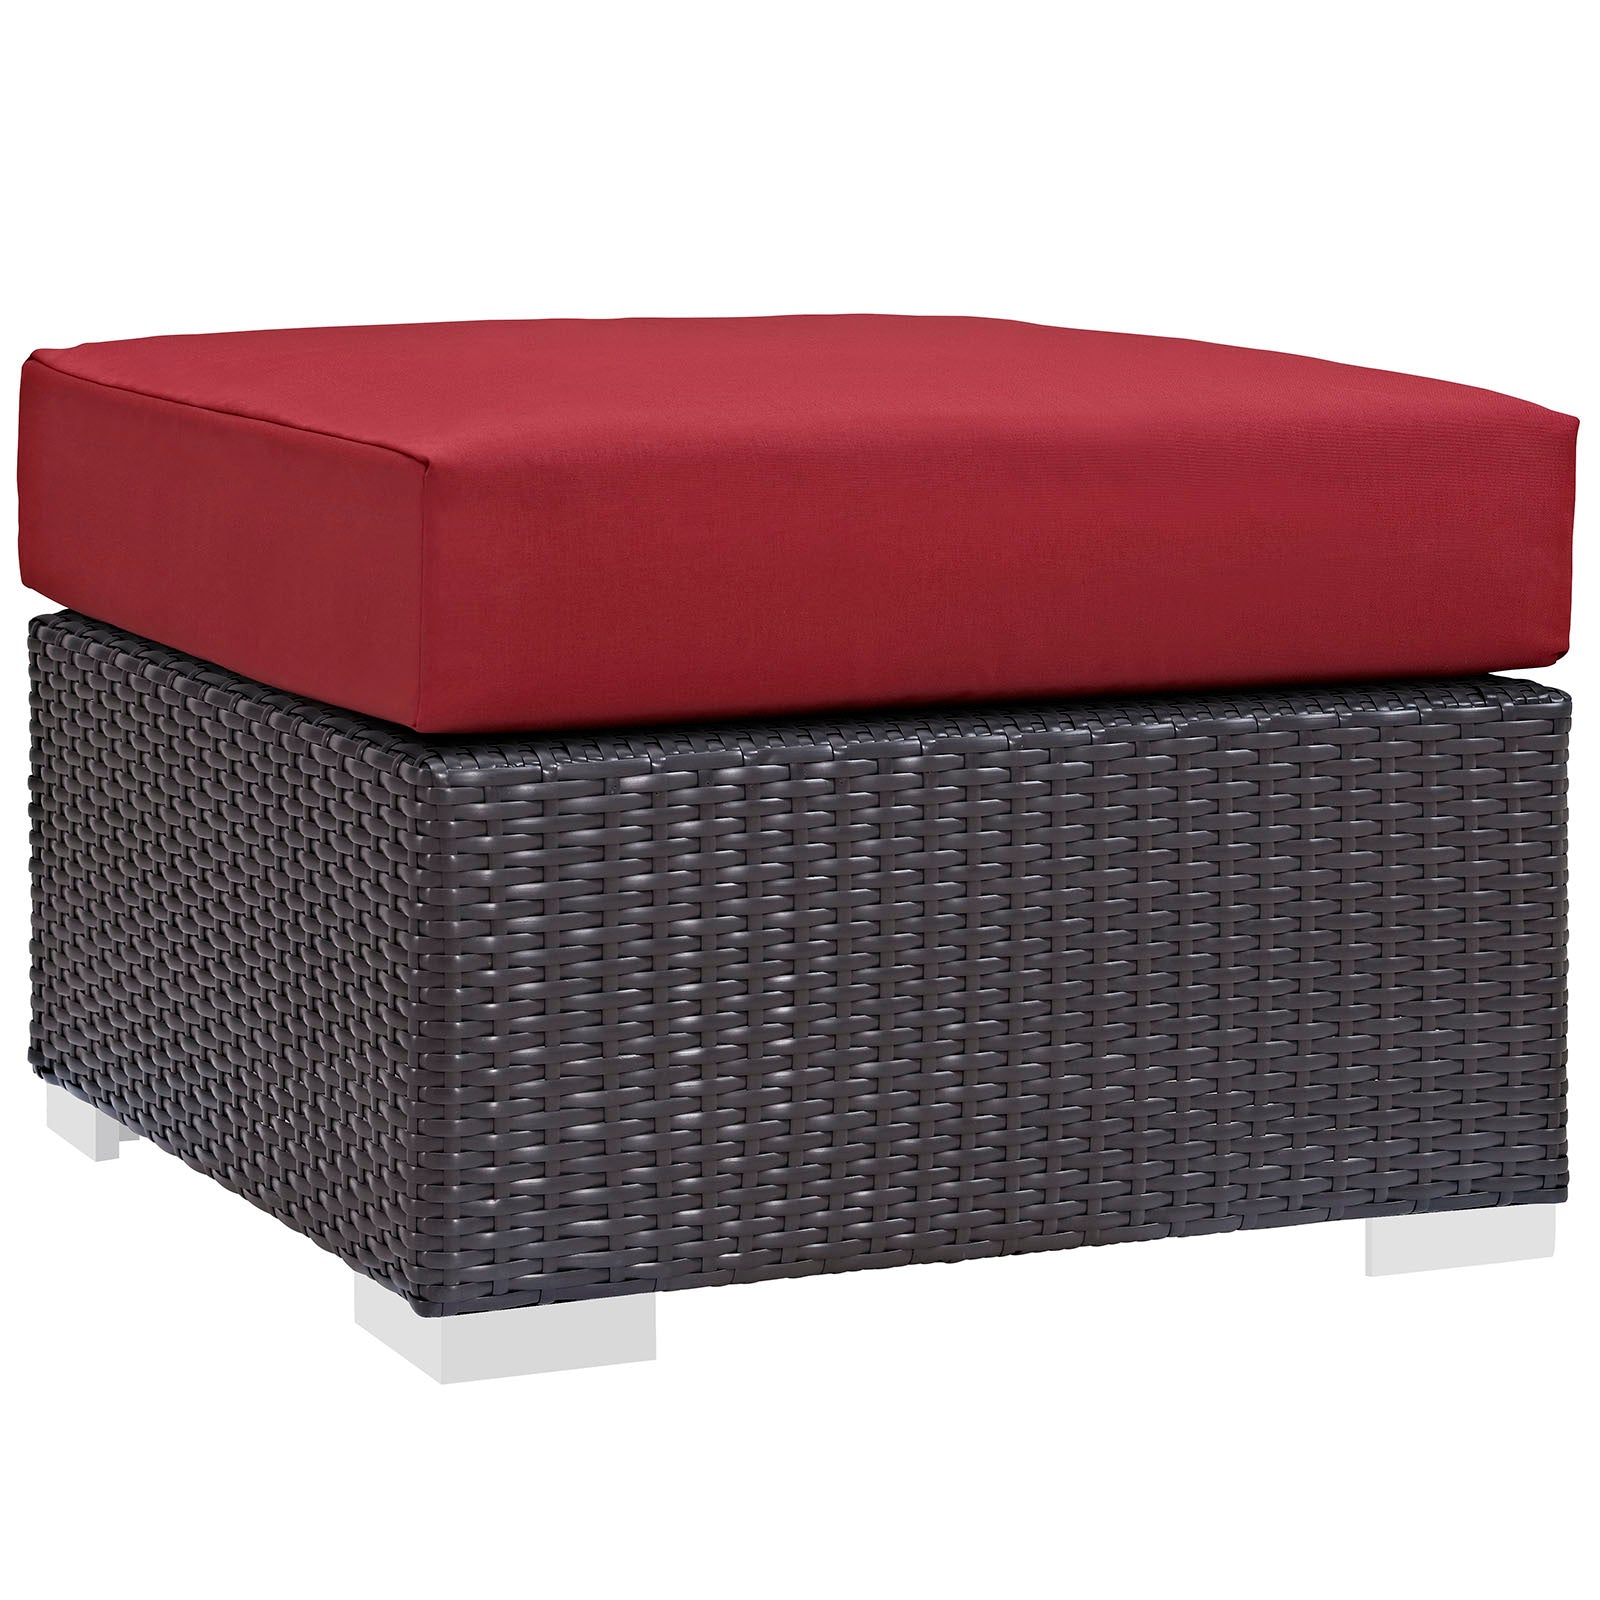 Modway Outdoor Stools & Benches - Convene Outdoor Patio Fabric Square Ottoman Espresso Red